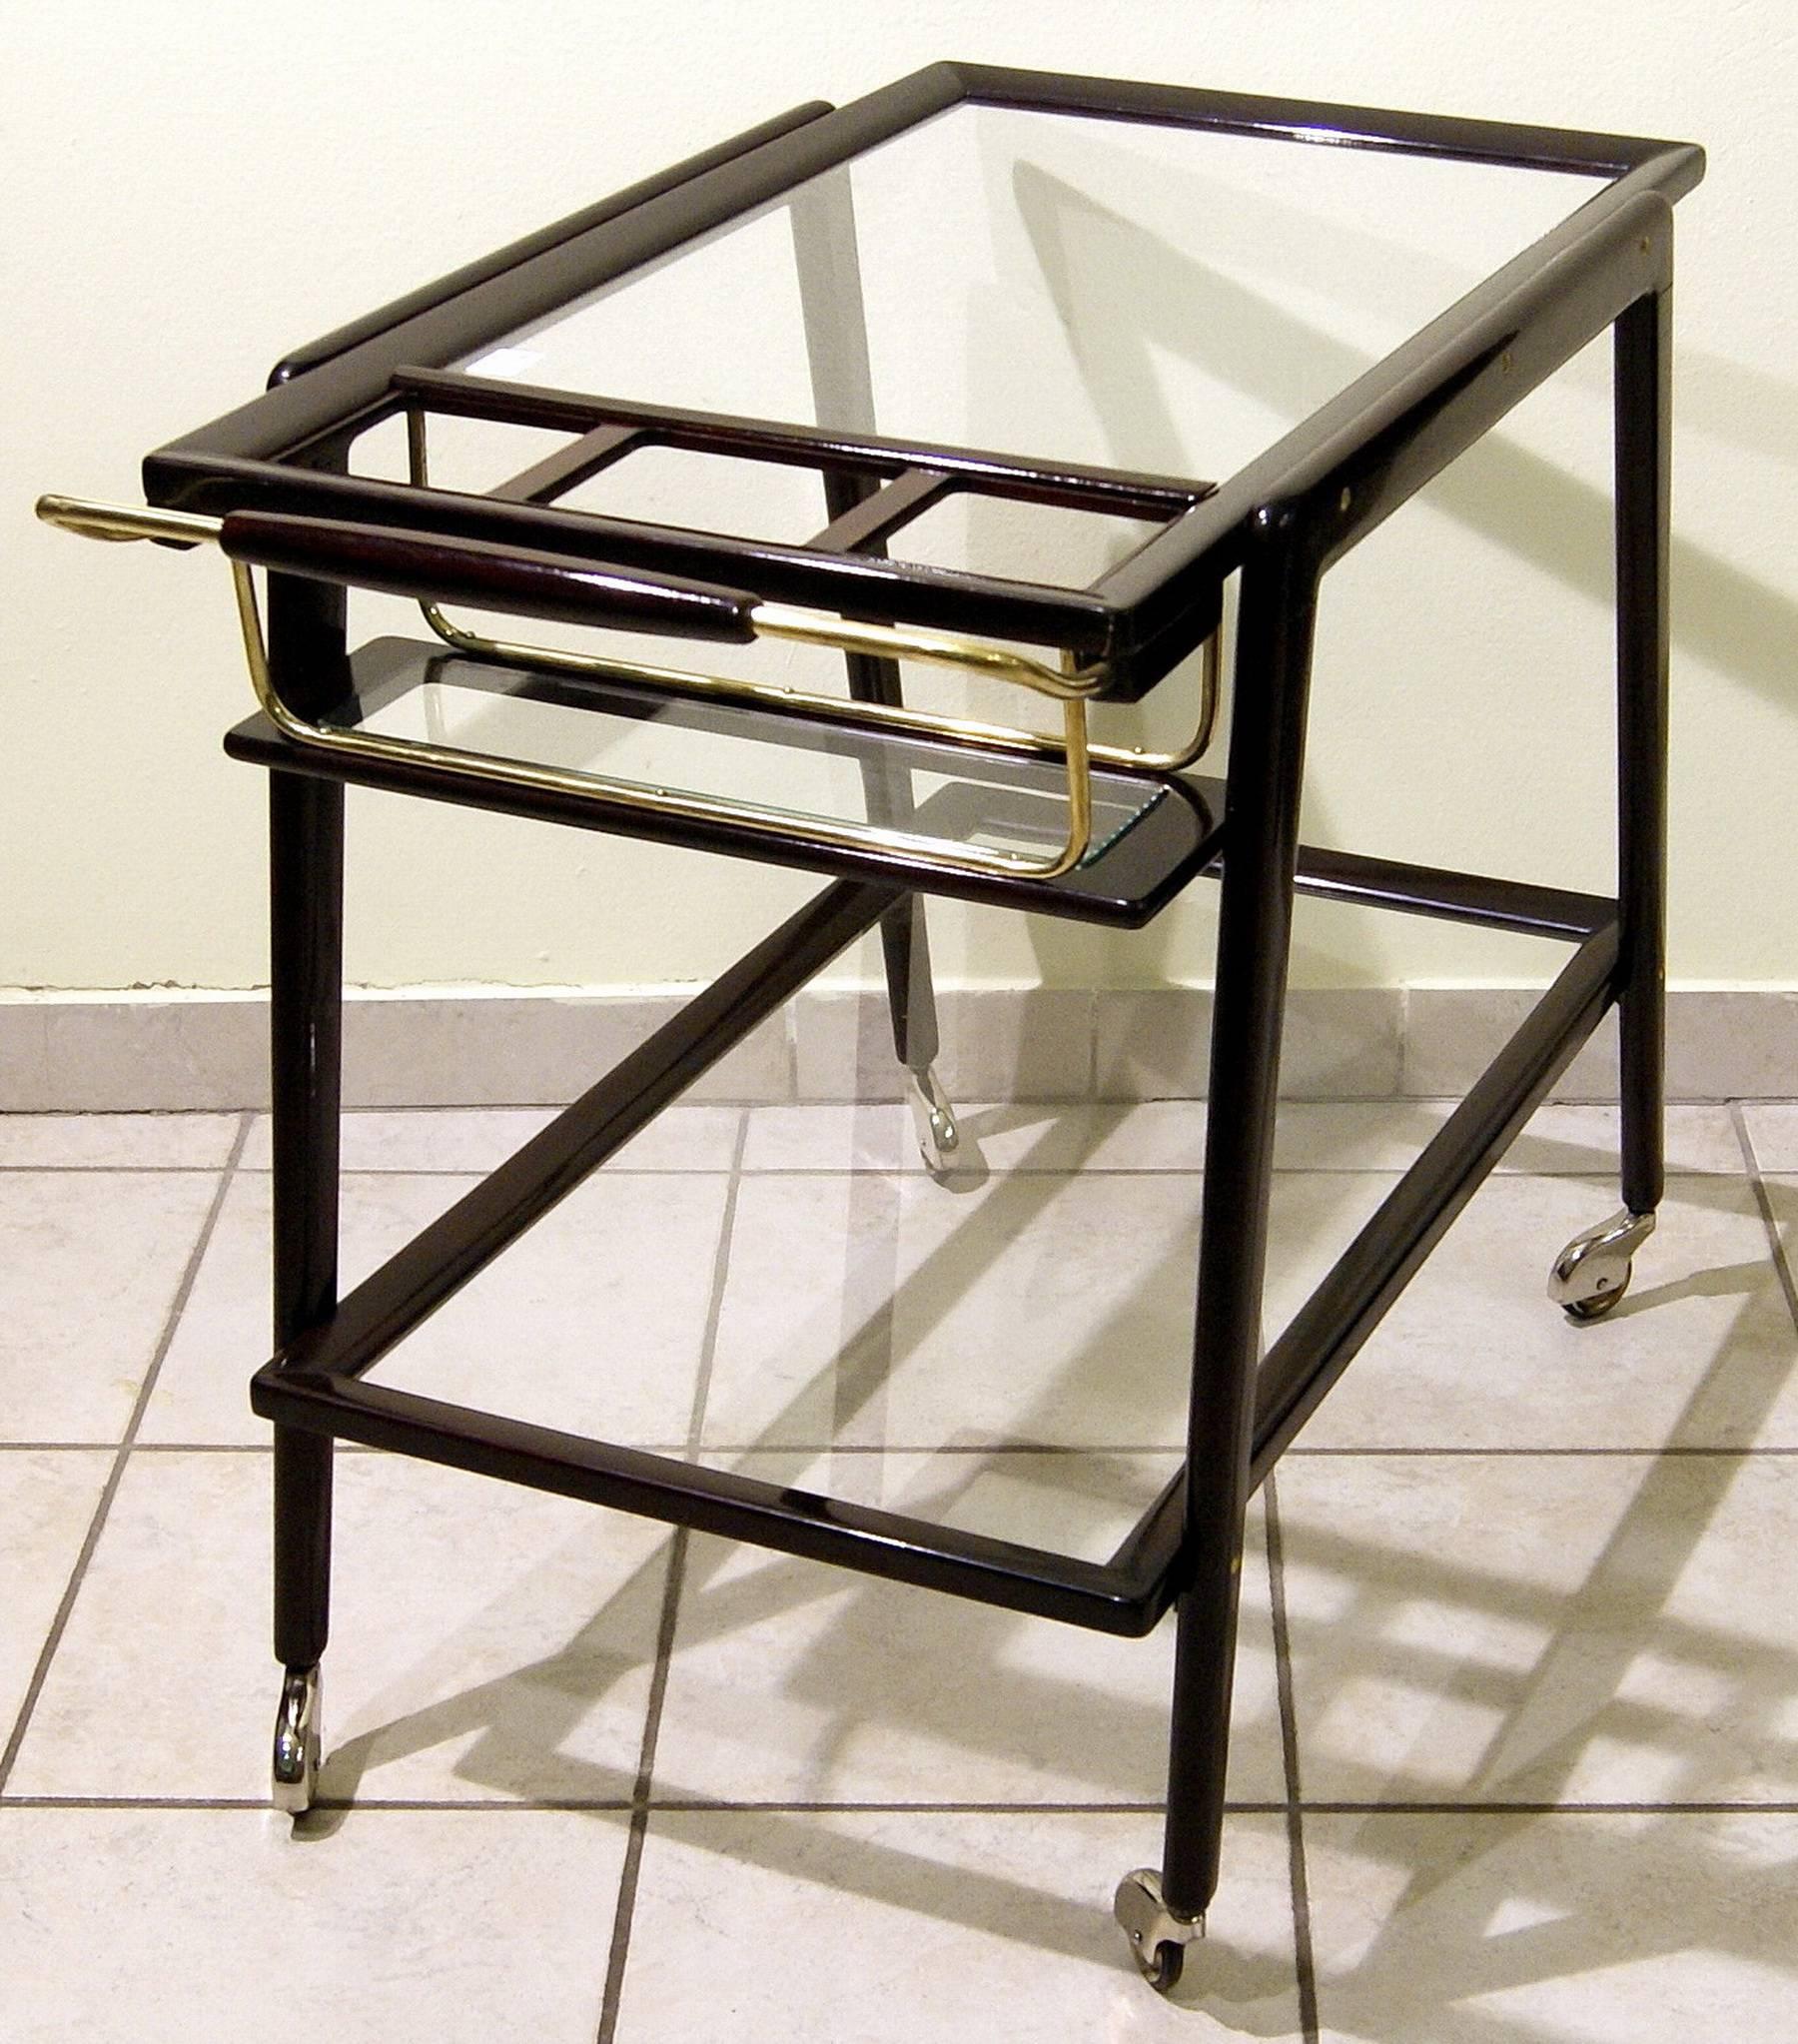 Most elegant serving trolley / bar cart, Vienna, made circa 1940-1950.
 
Serving trolley of finest manufacturing quality.
Dark mahogany stained / refurbished by hand.
The serving trolley's shelves are made of glass / it stands on original small